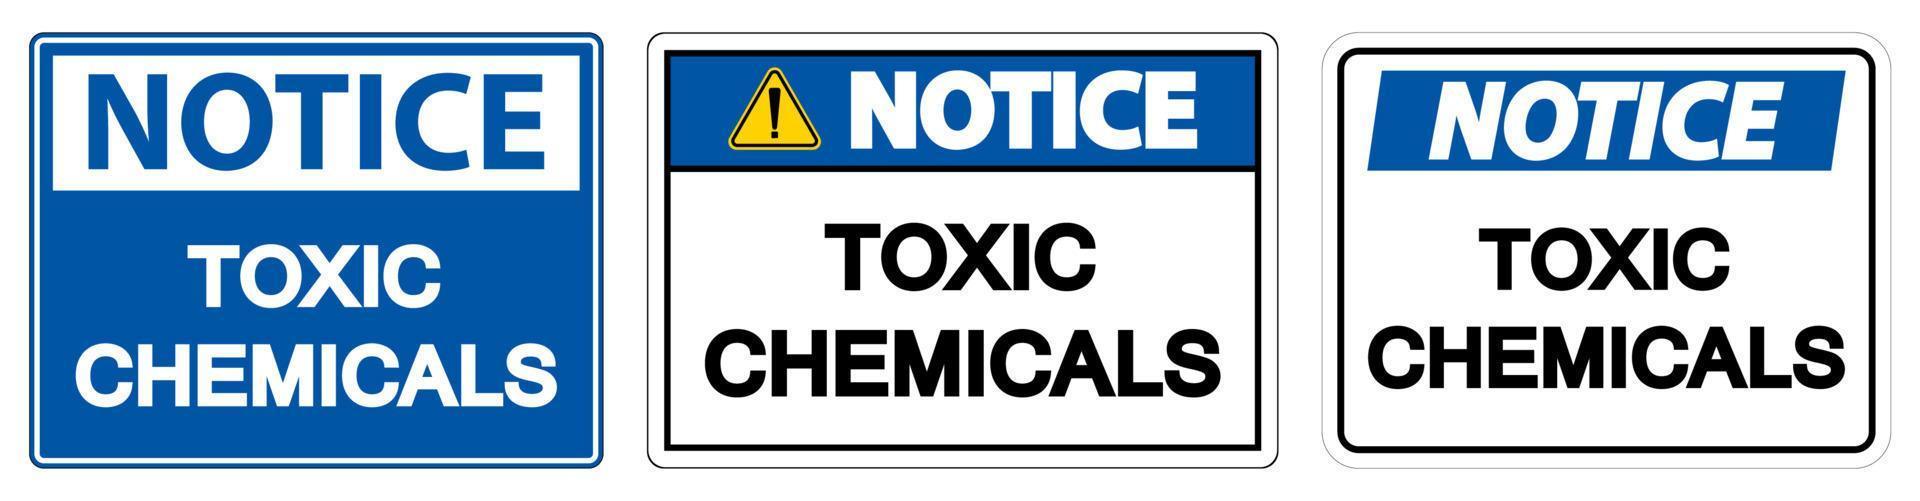 Notice Toxic Chemicals Symbol Sign On White Background vector